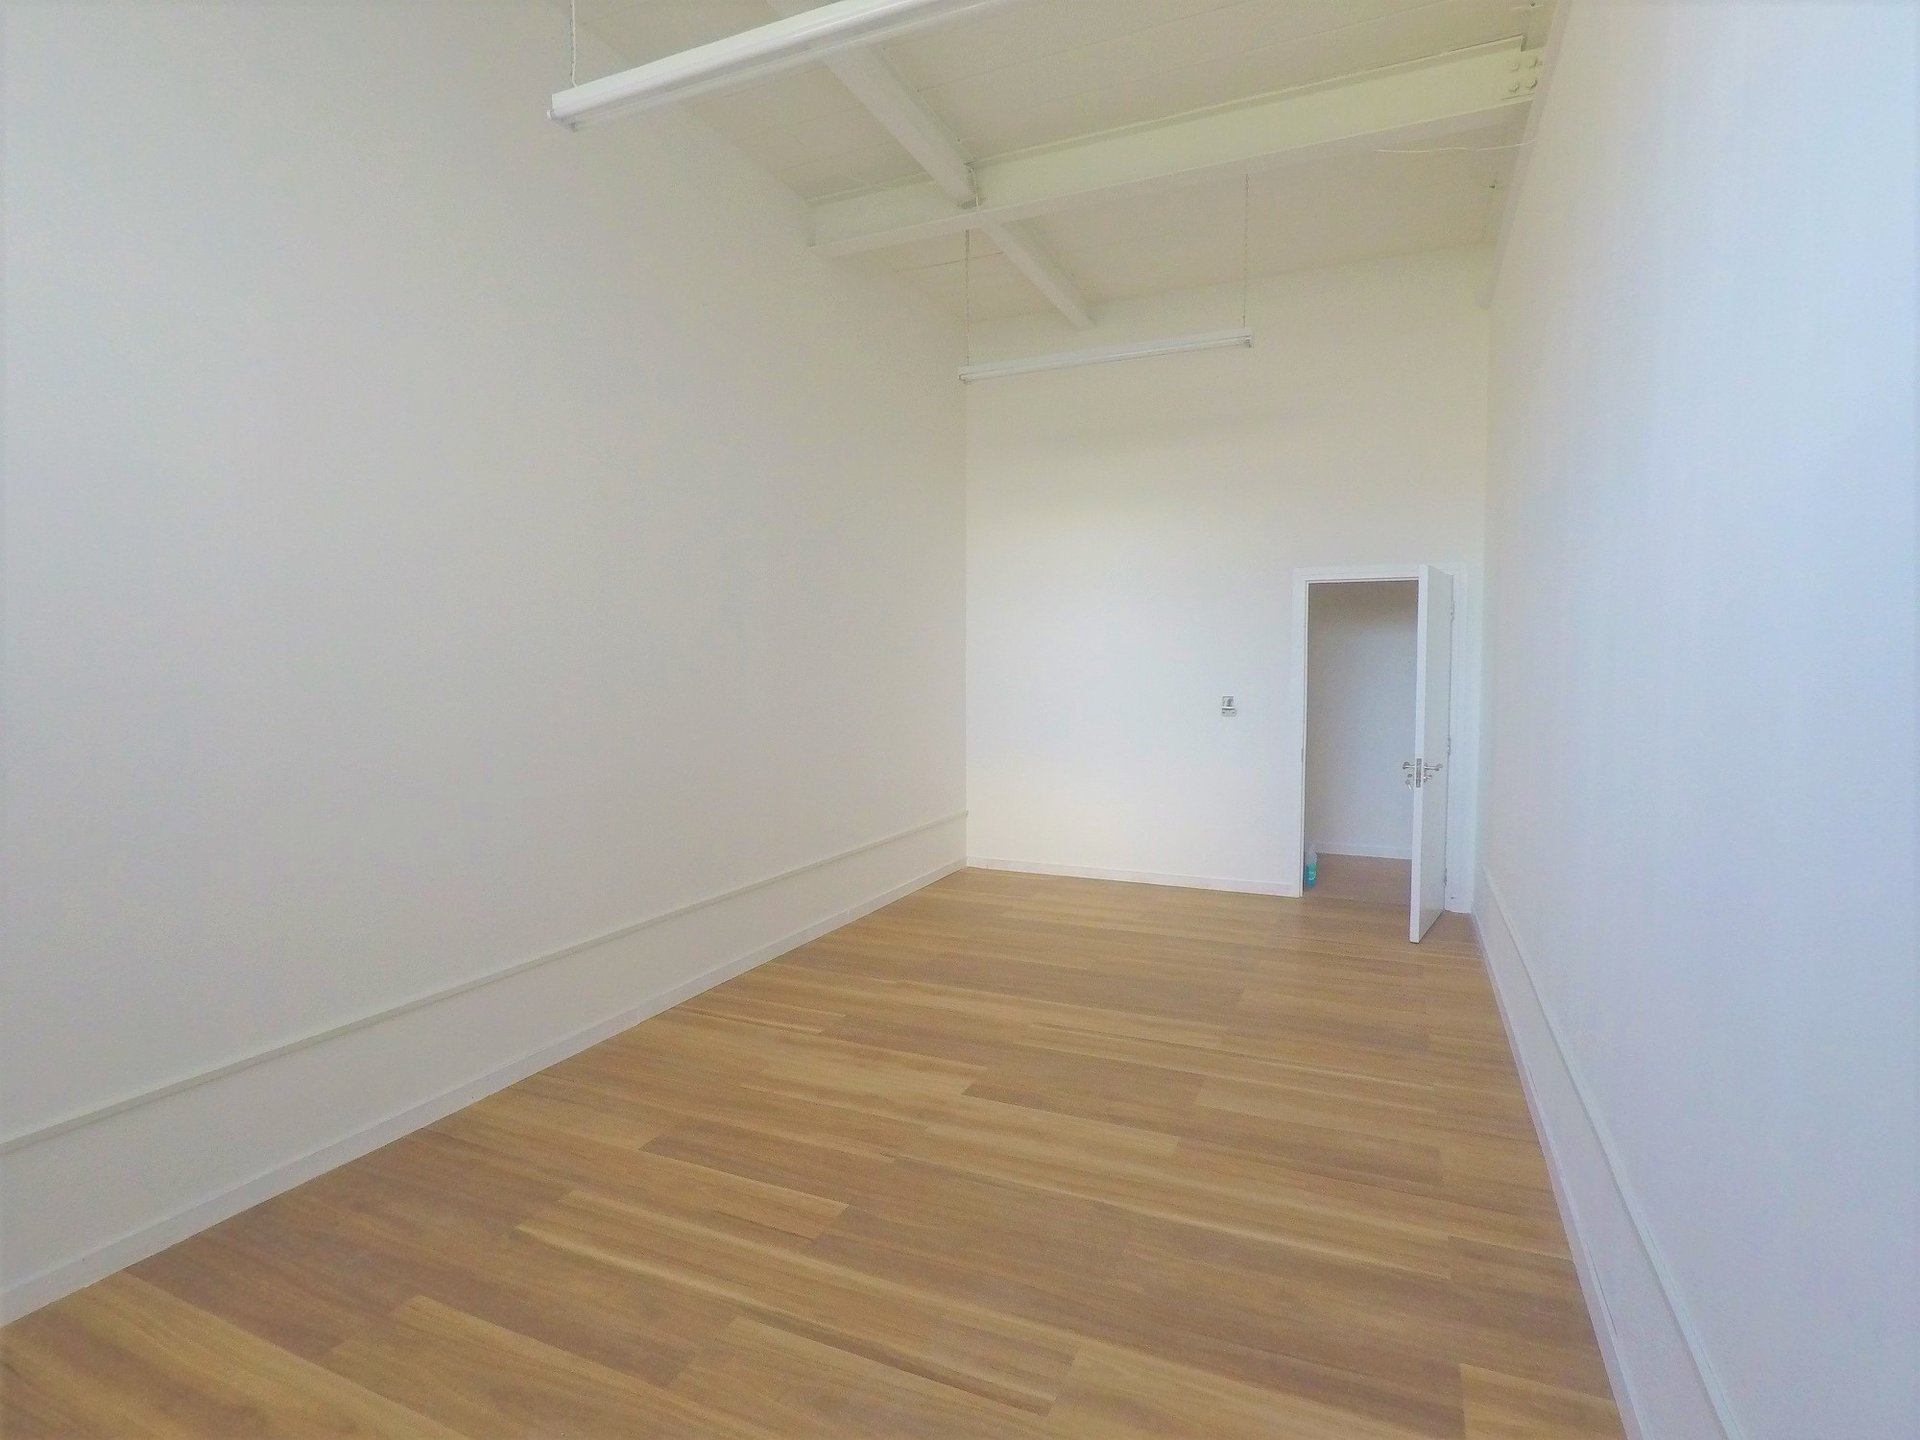 Interior of Our Space - Poplar